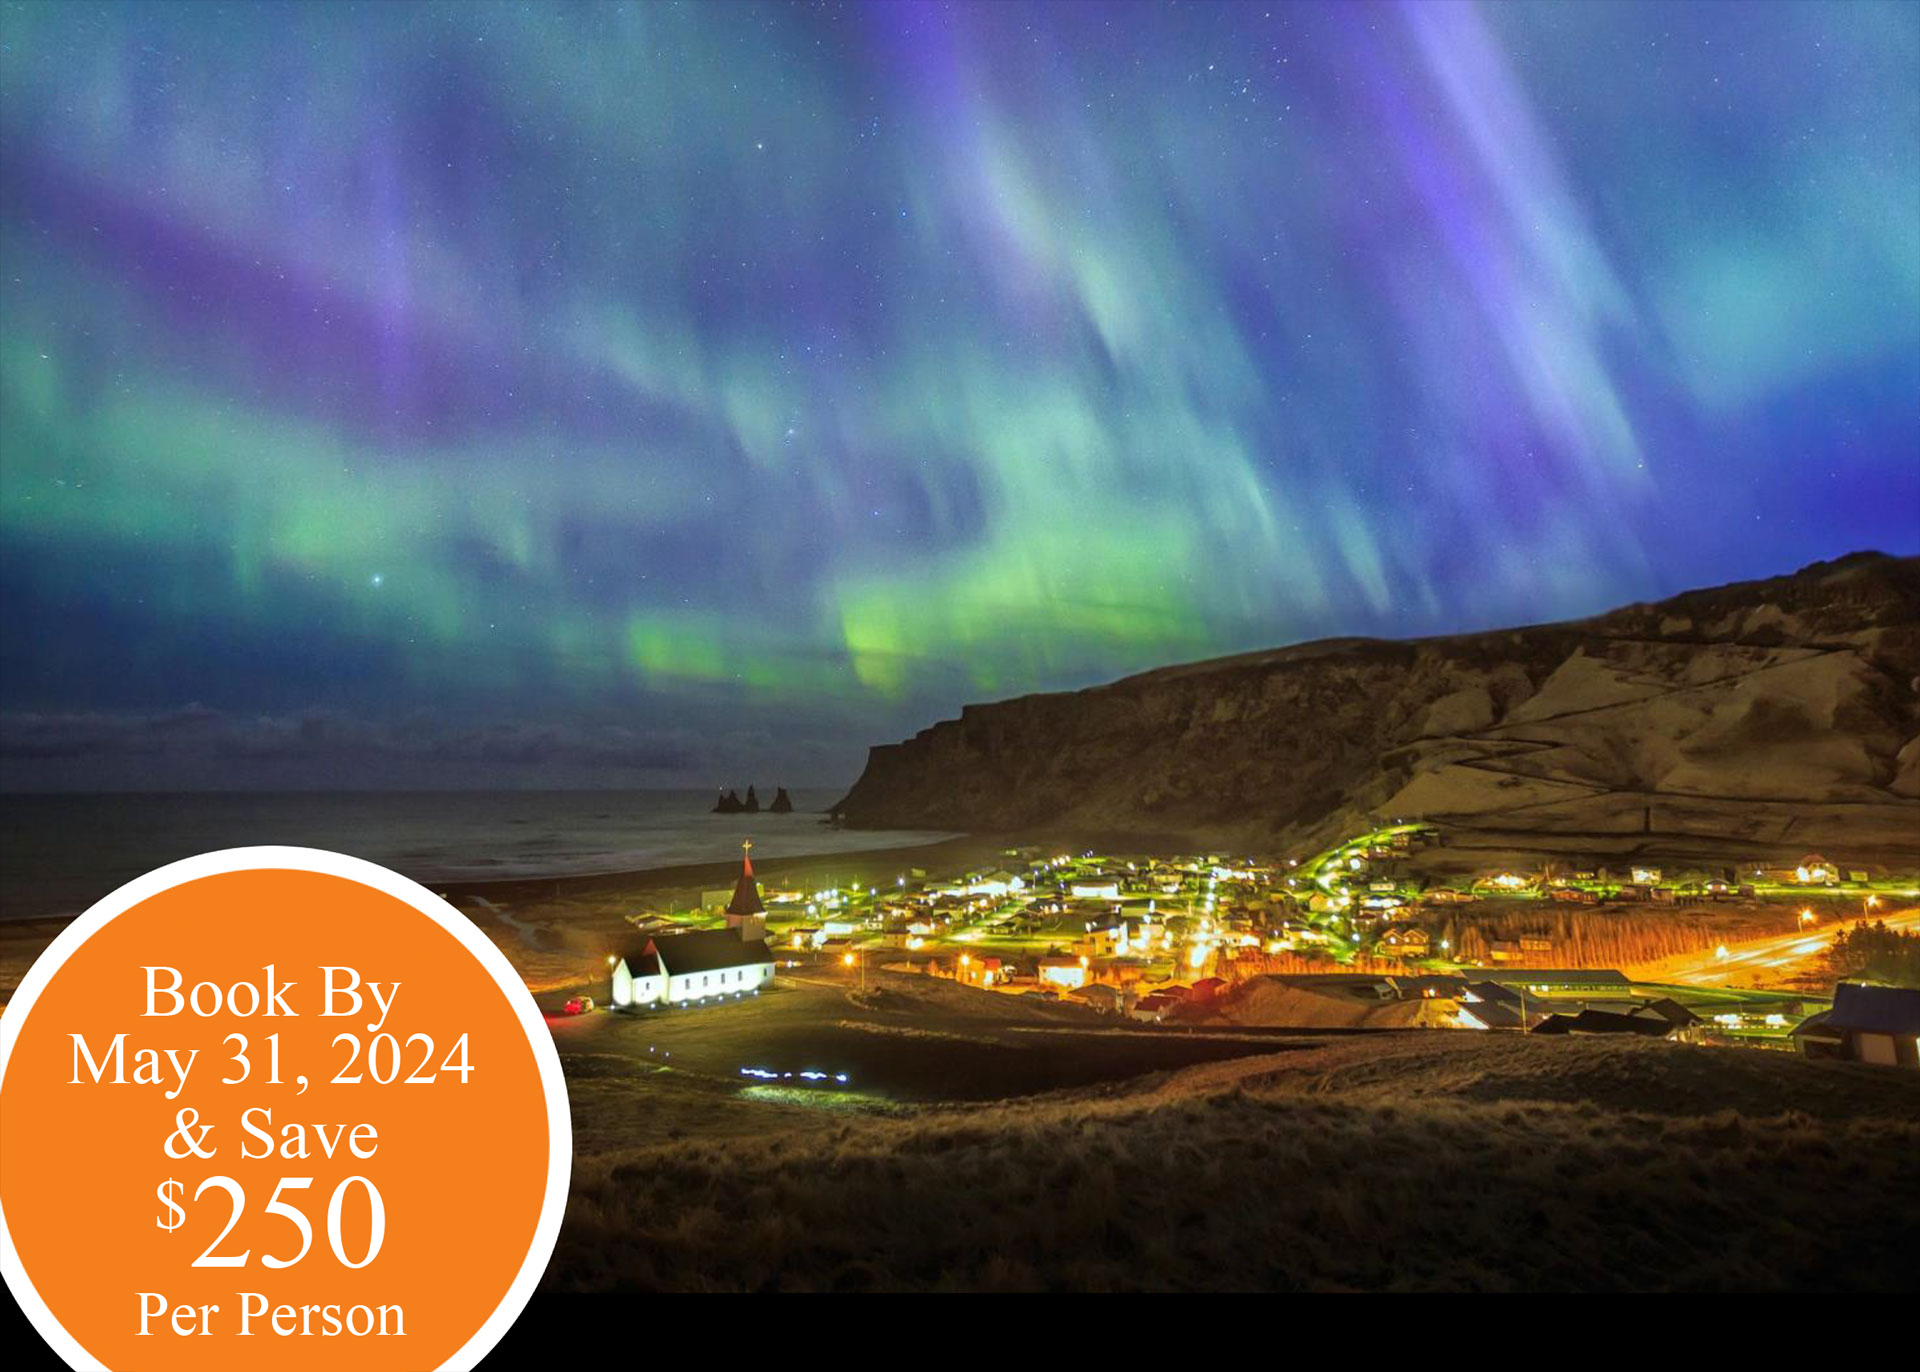 2025 Iceland Magical Northern Lights Tour (January)